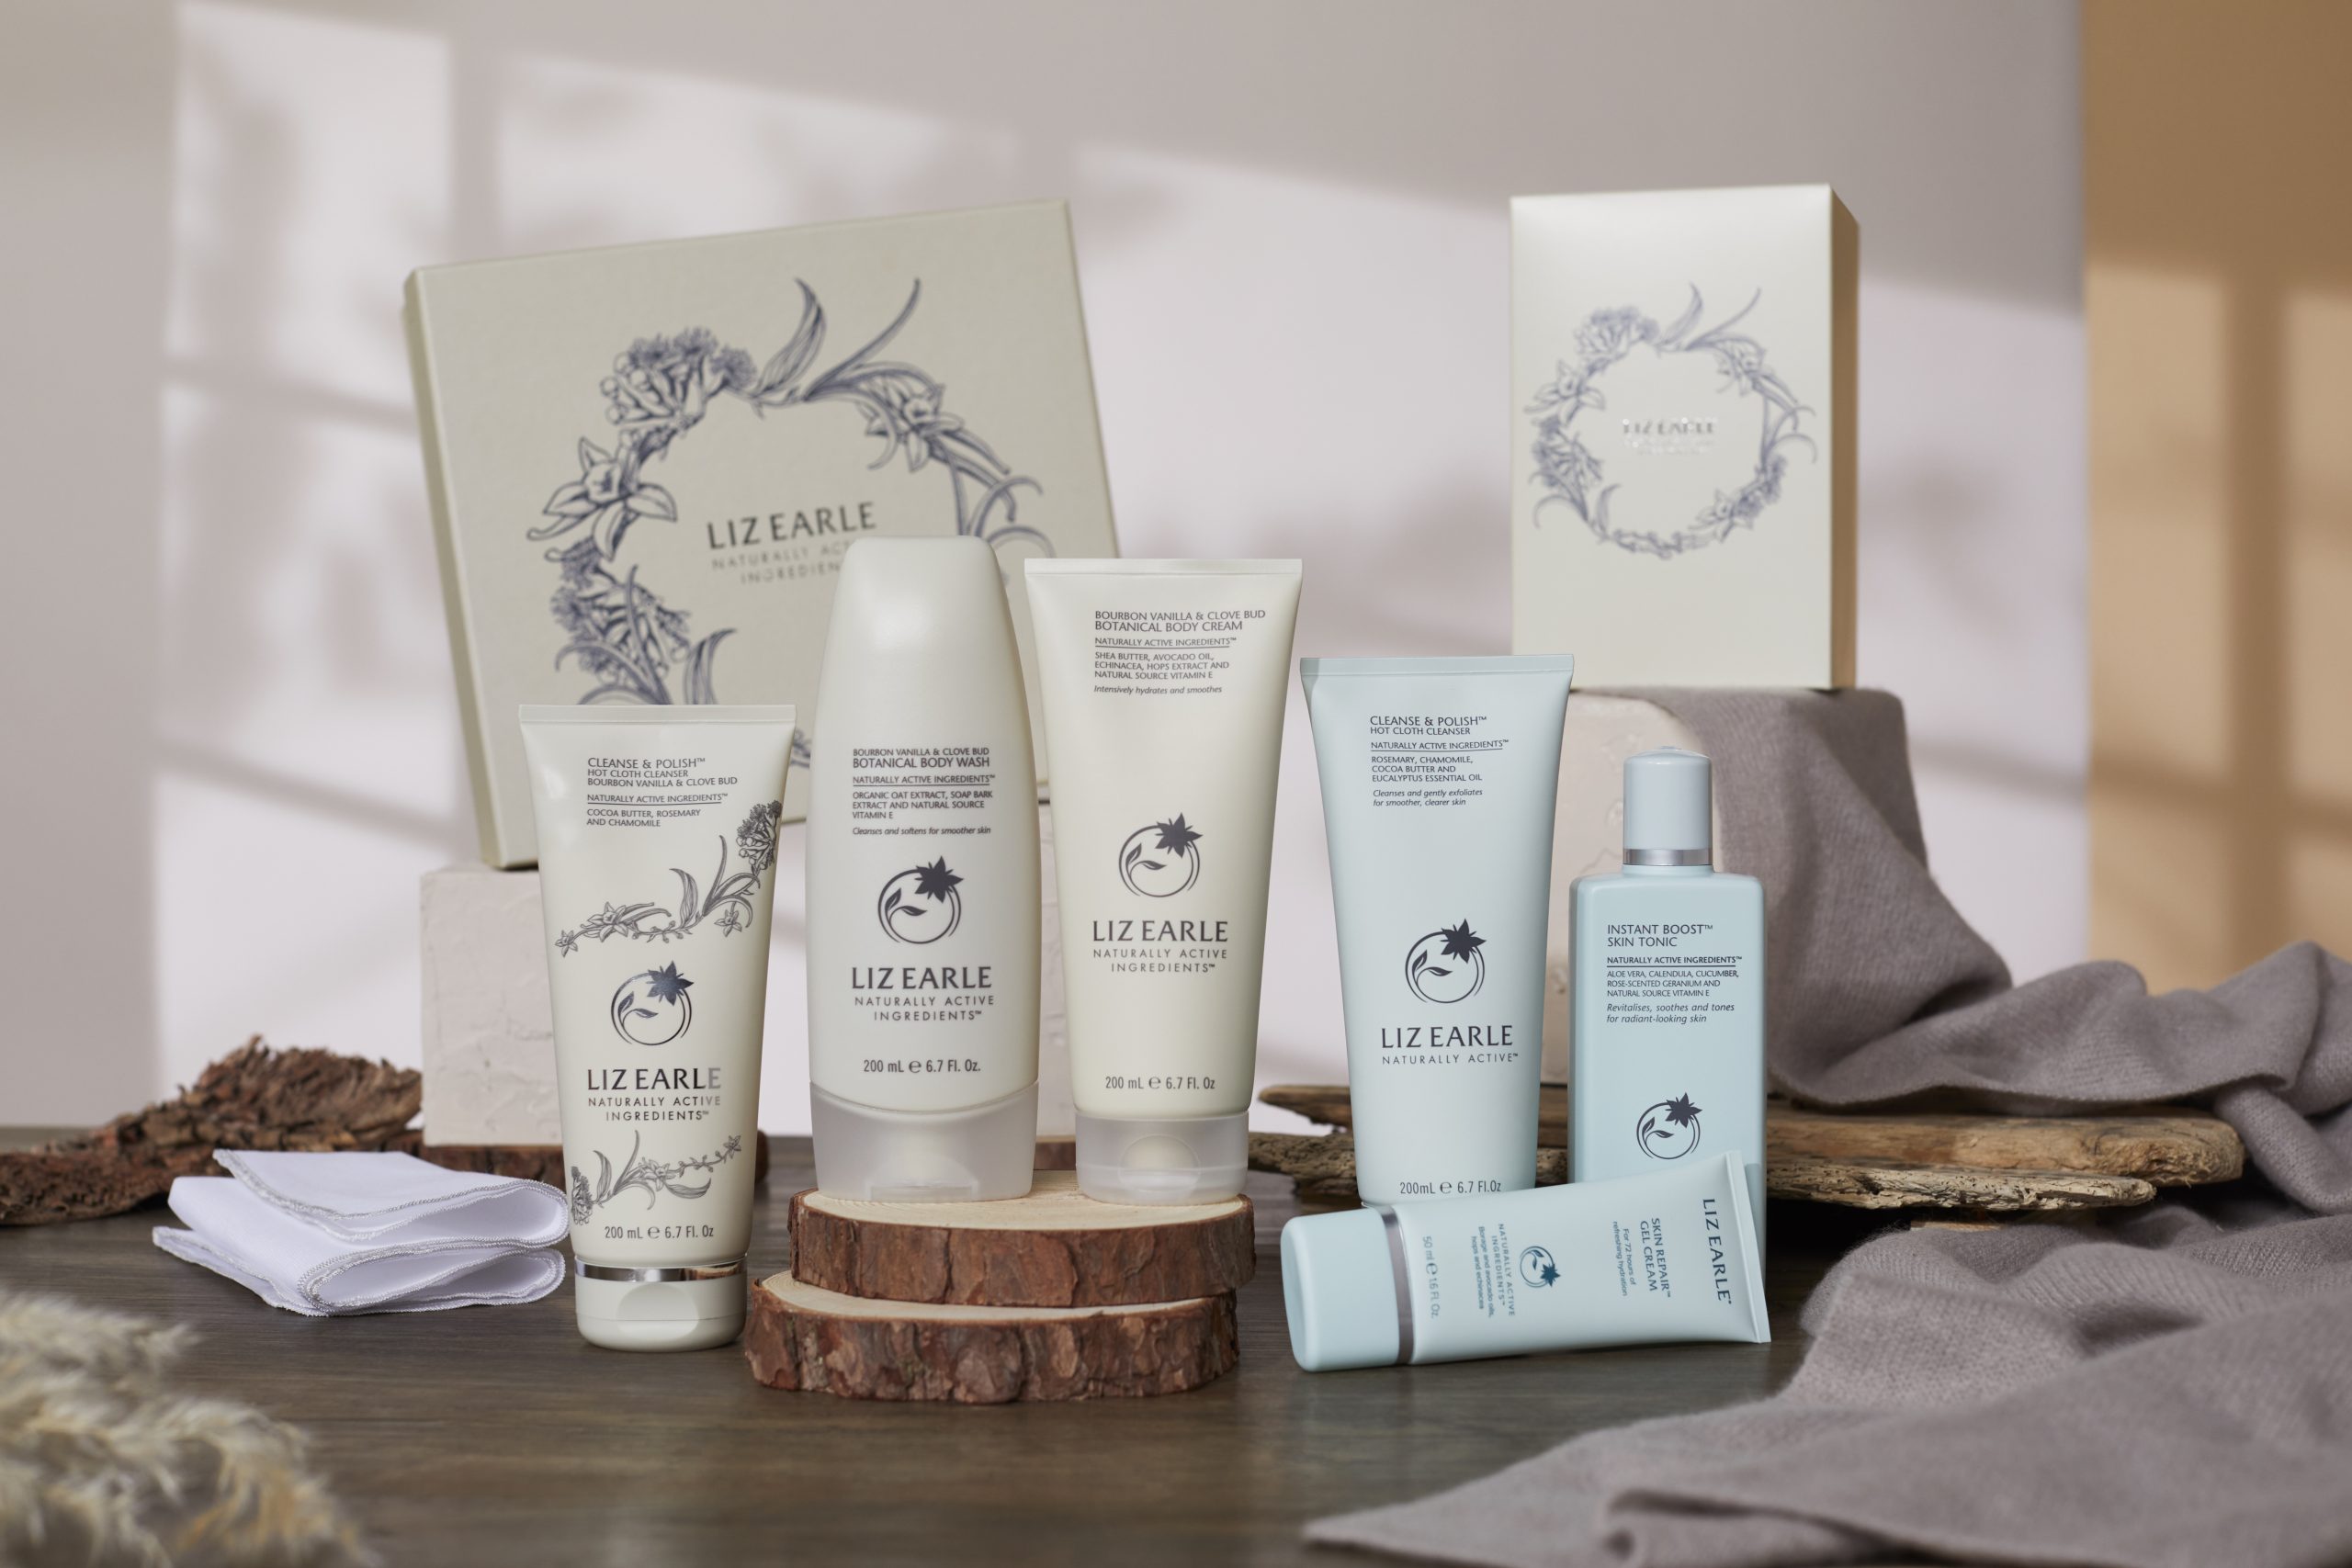 Don't miss this Liz Earle offer | Stories